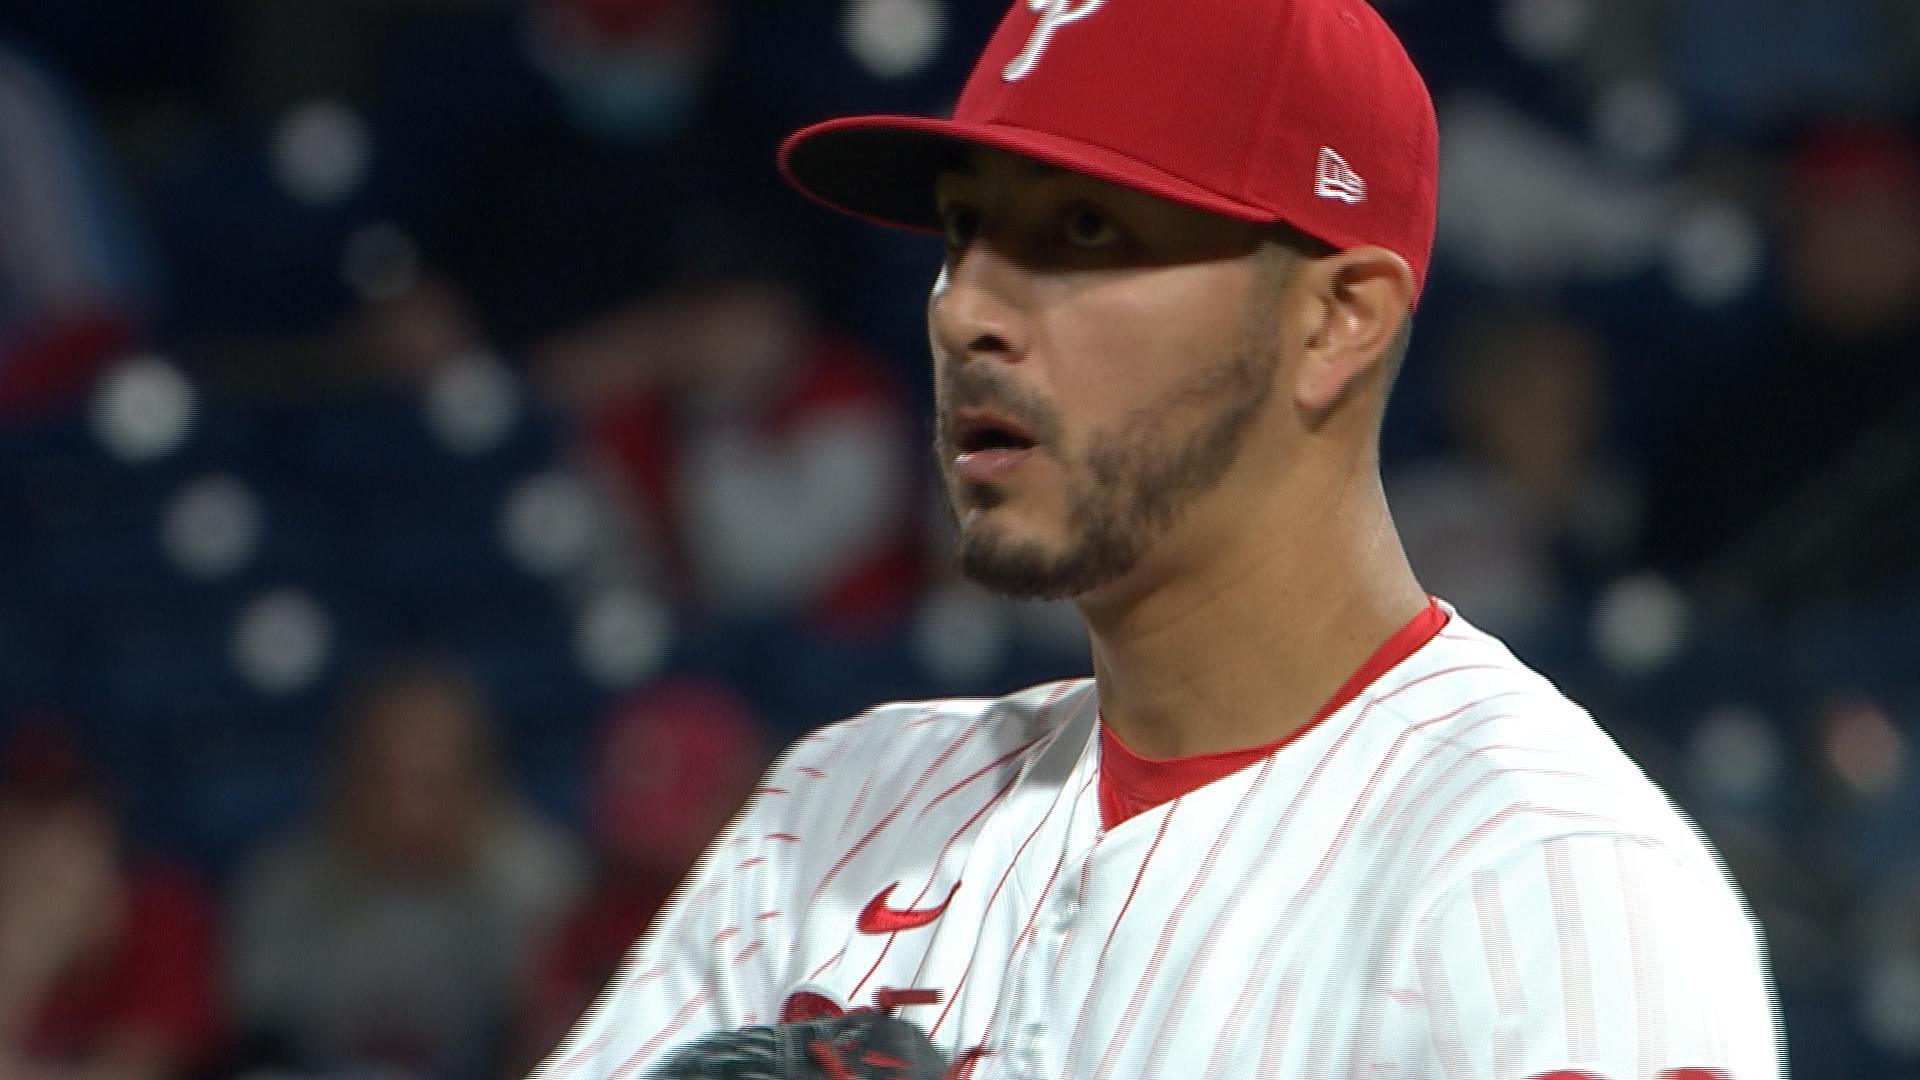 Phillies vs Mets: Vince Velasquez unraveled in first loss of 2021